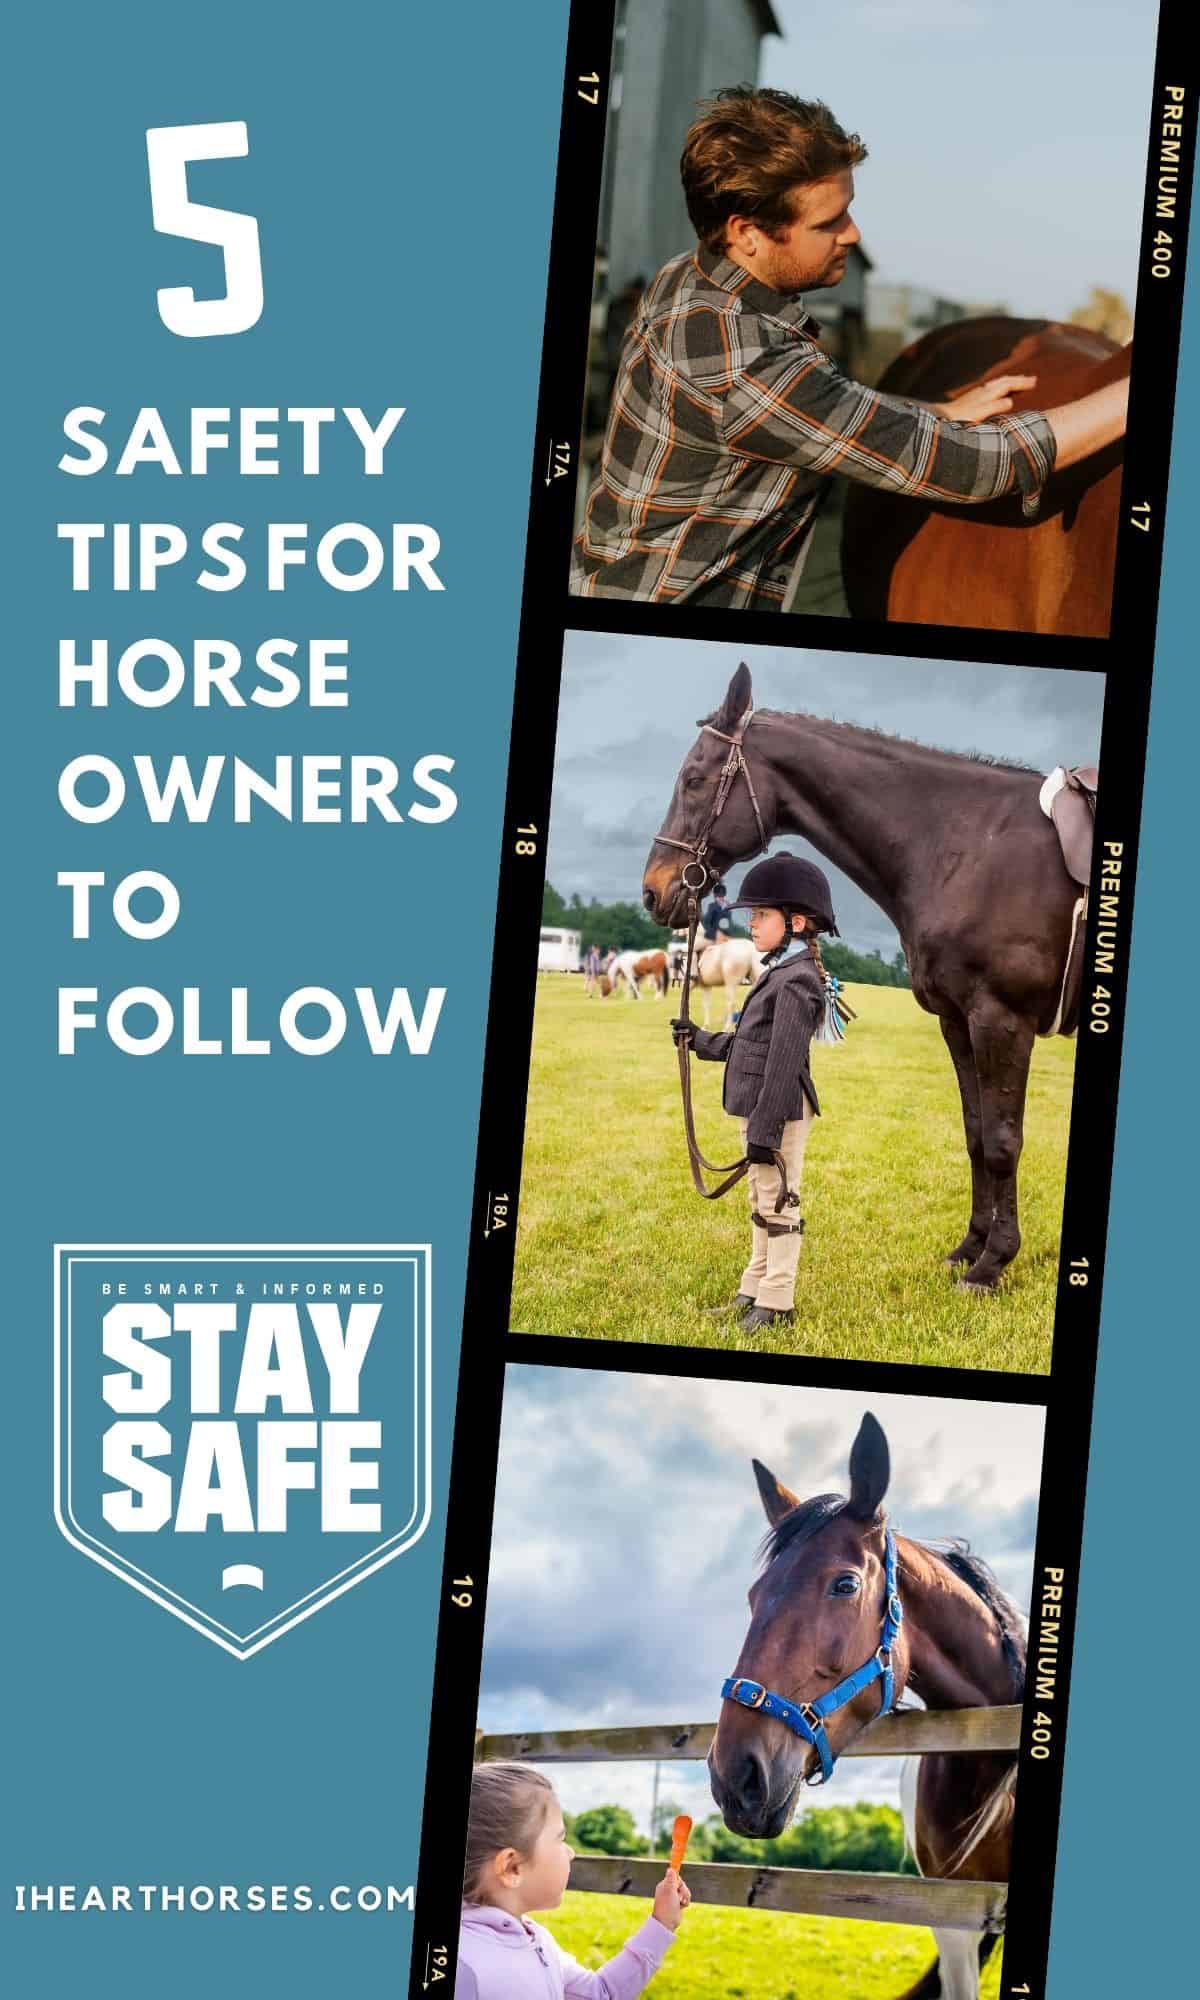 5 Safety Tips For Horse Owners When Working With Your Horse